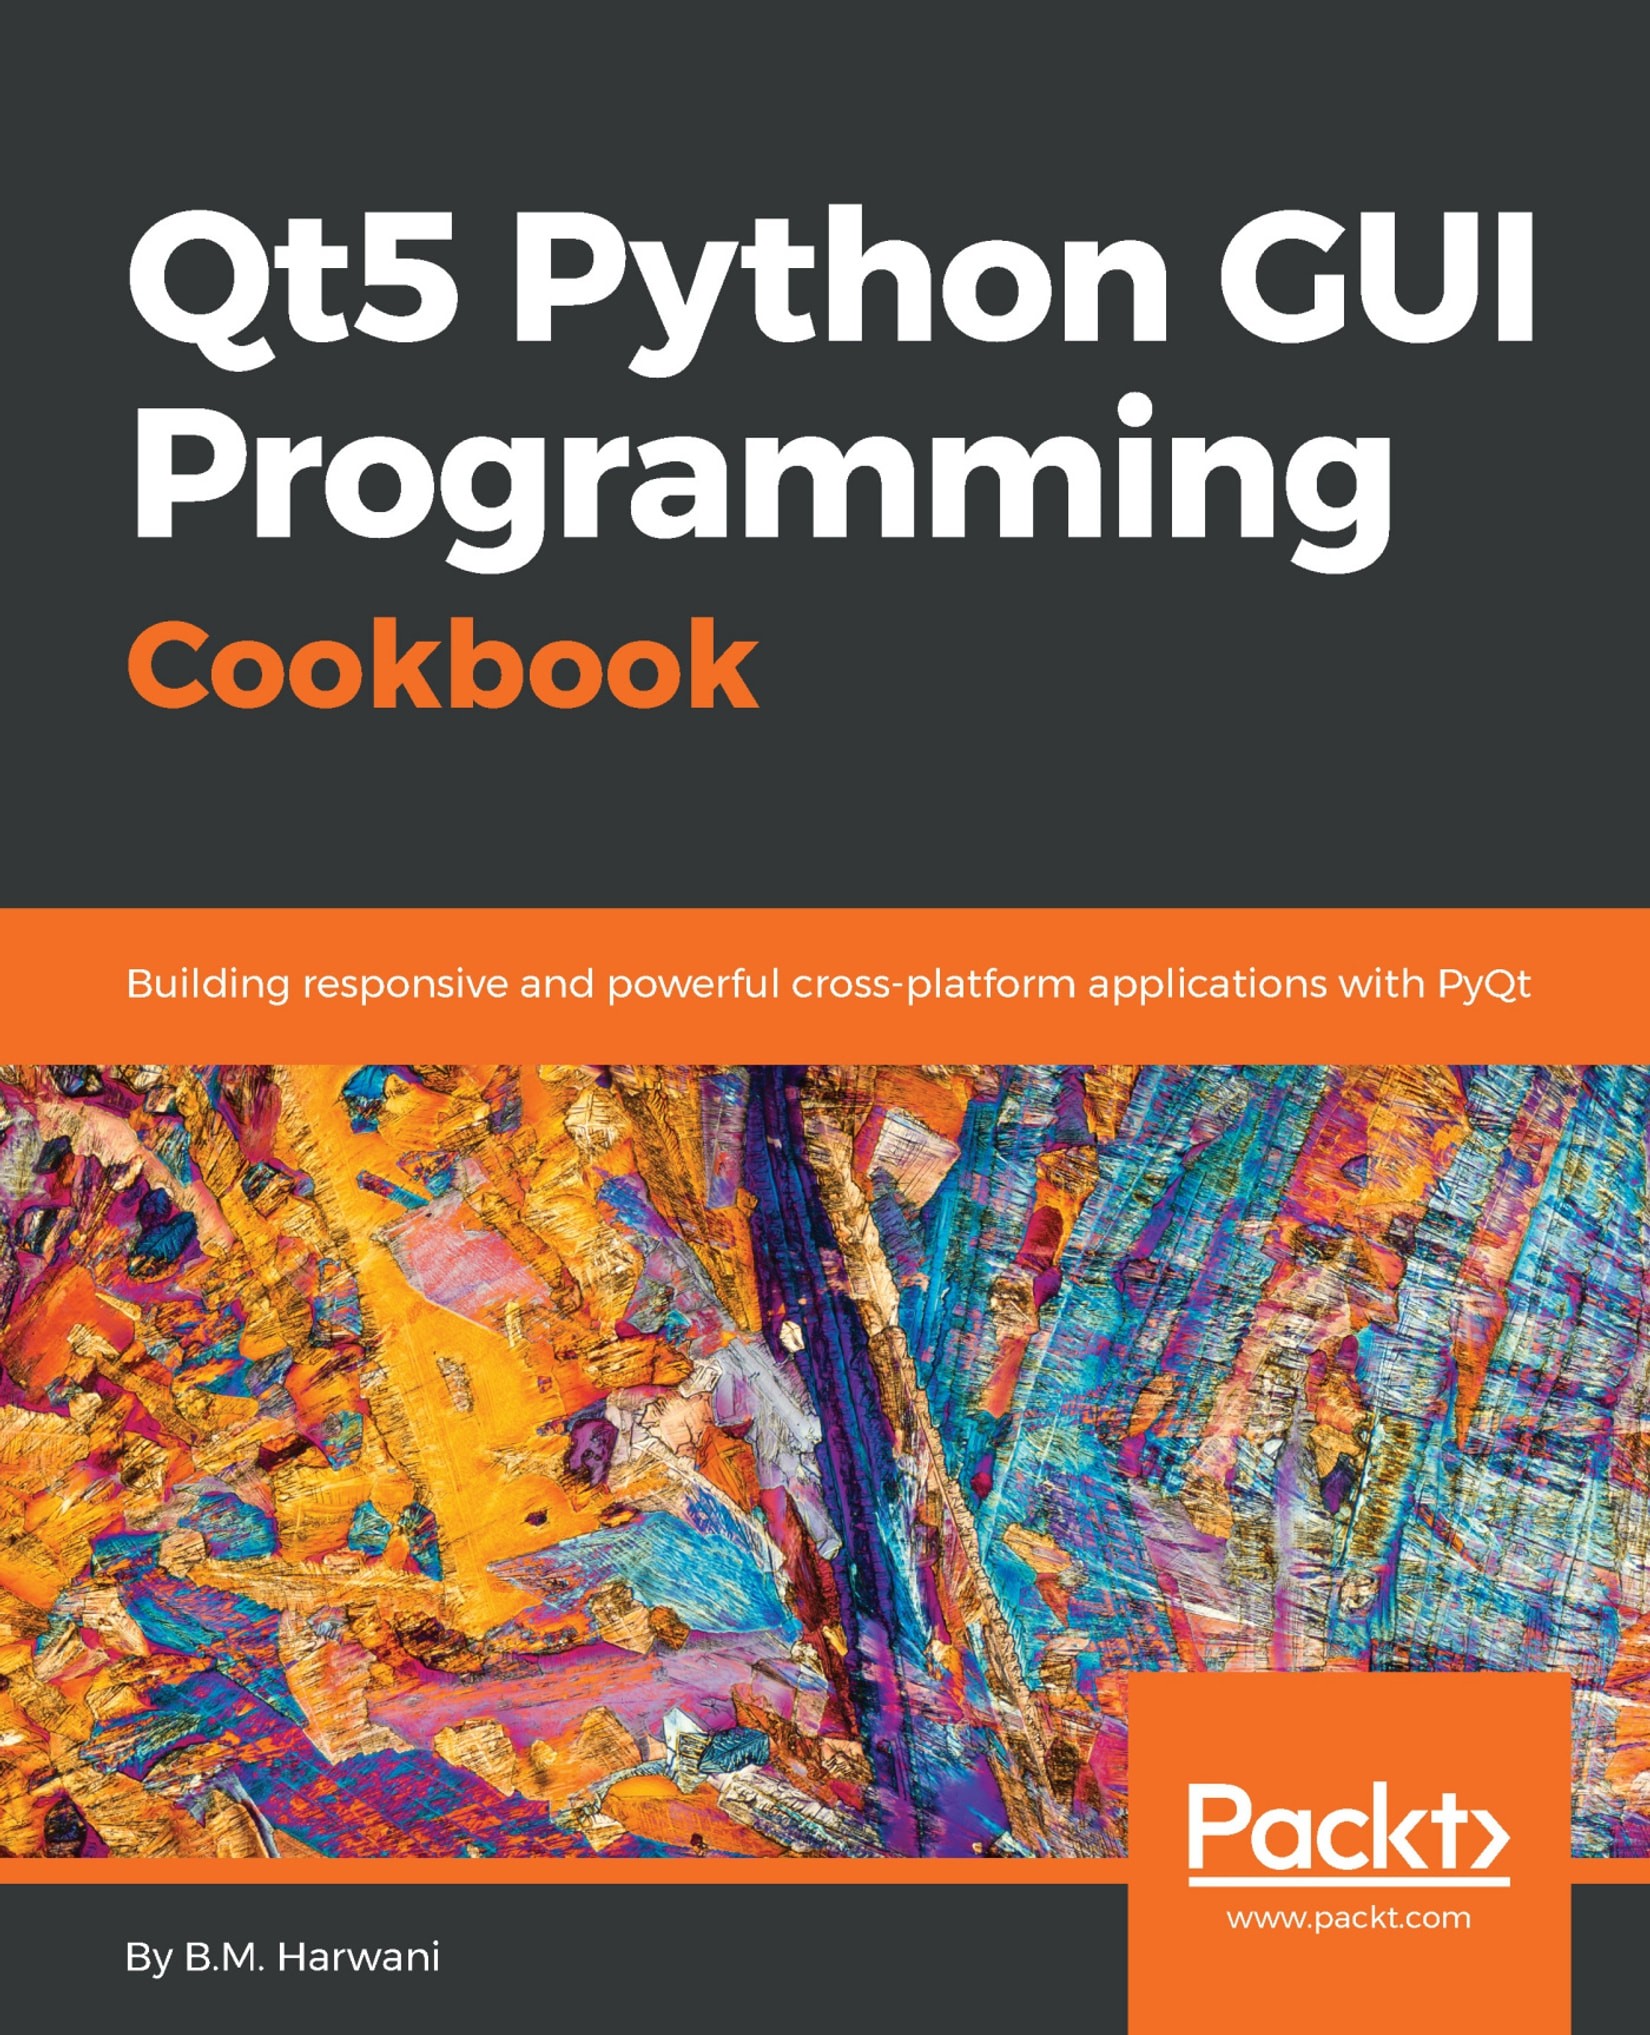 Qt5 Python GUI Programming Cookbook: Building Responsive and Powerful Cross-Platform Applications With Pyqt